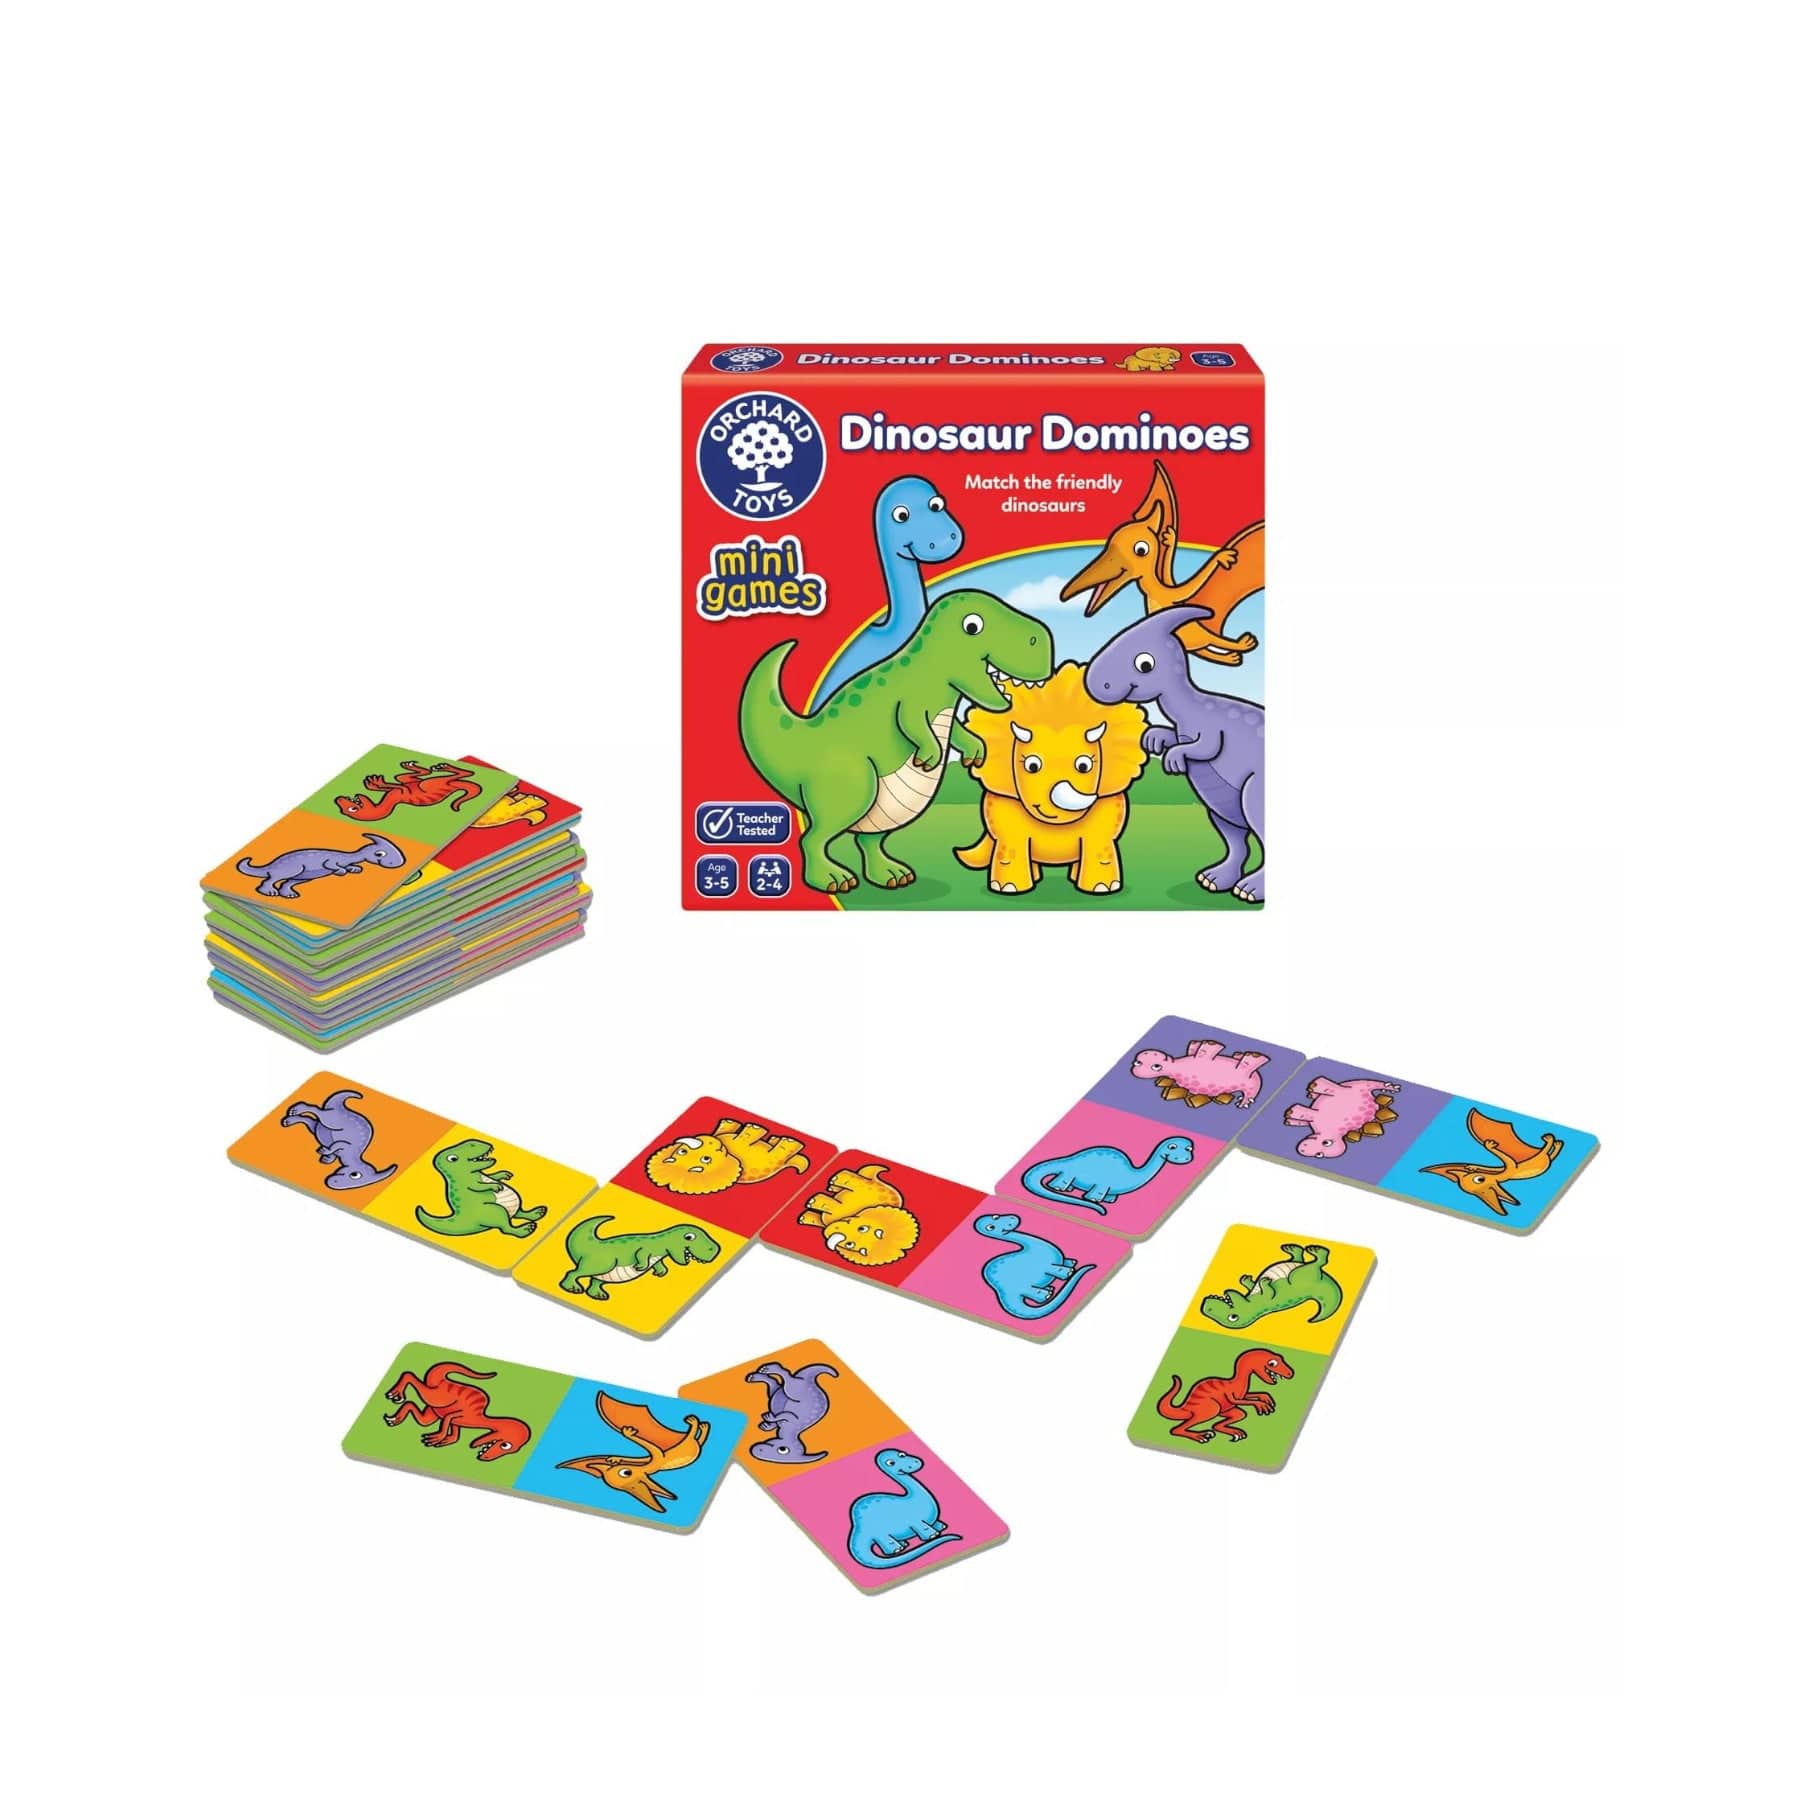 Dinosaur Dominoes game by Orchard Toys for children with colorful illustrated dinosaur cards and game box displayed on white background.